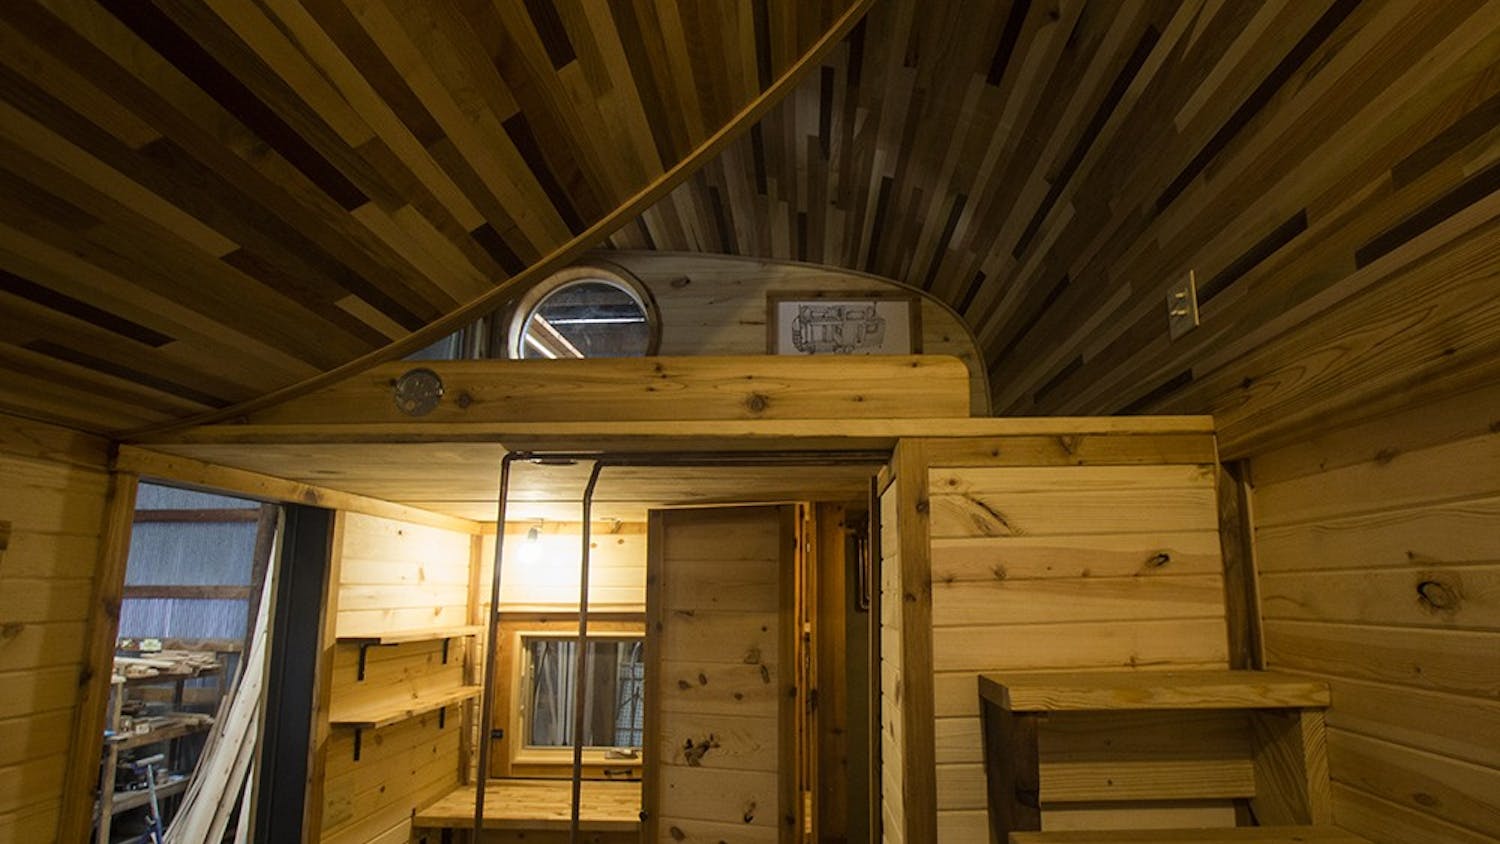 The main interior space of the tiny house holds a tiny stove, tiny sink and regular-sized bathroom. The project was commissioned to be placed on a southern Indiana farm and can be both mobile and permanently set.